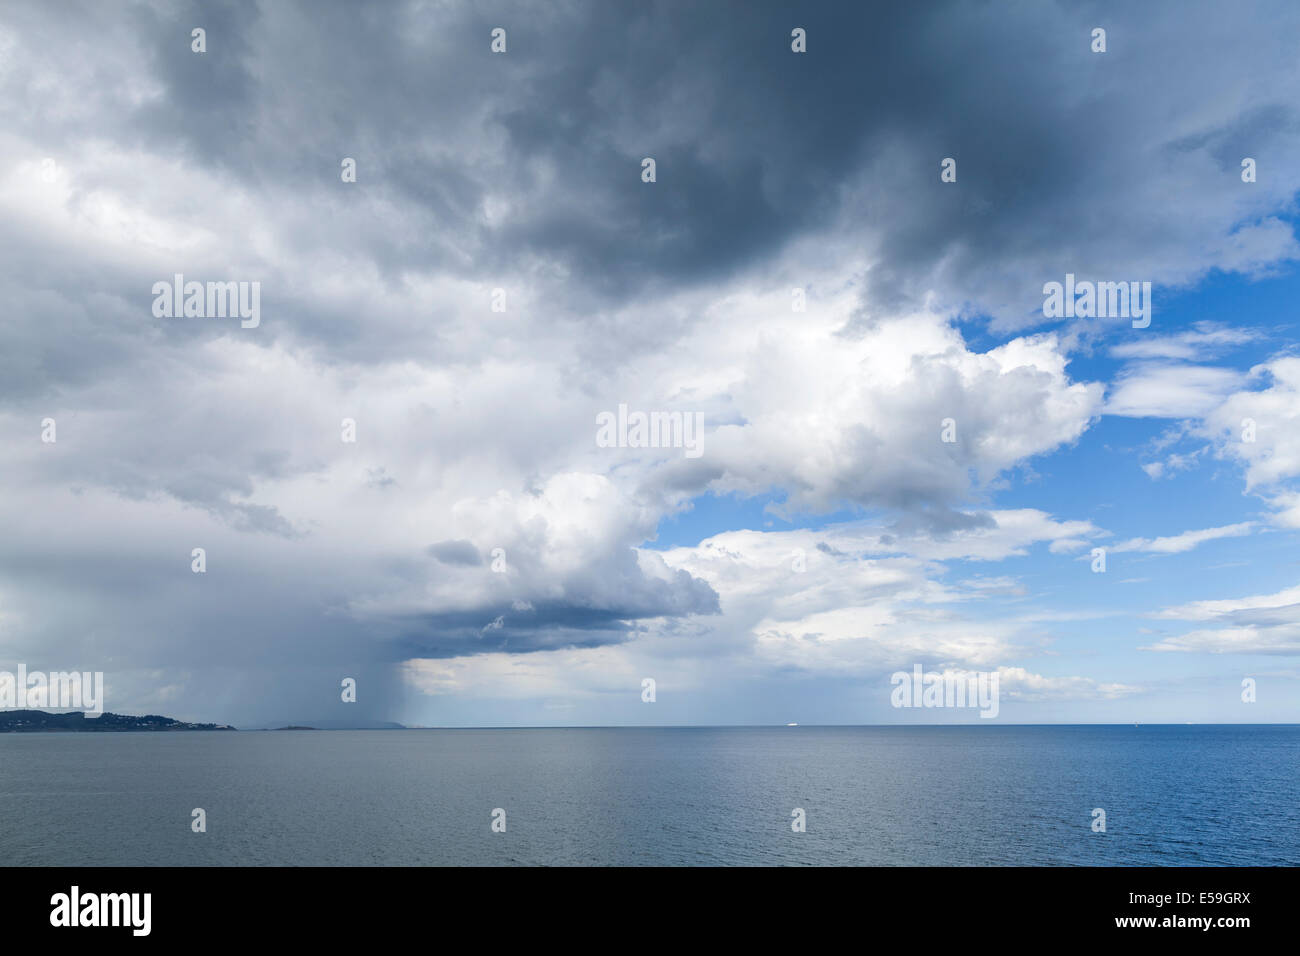 Rain clouds over the east coast of Ireland seen from Bray, County Wicklow, Ireland. Stock Photo